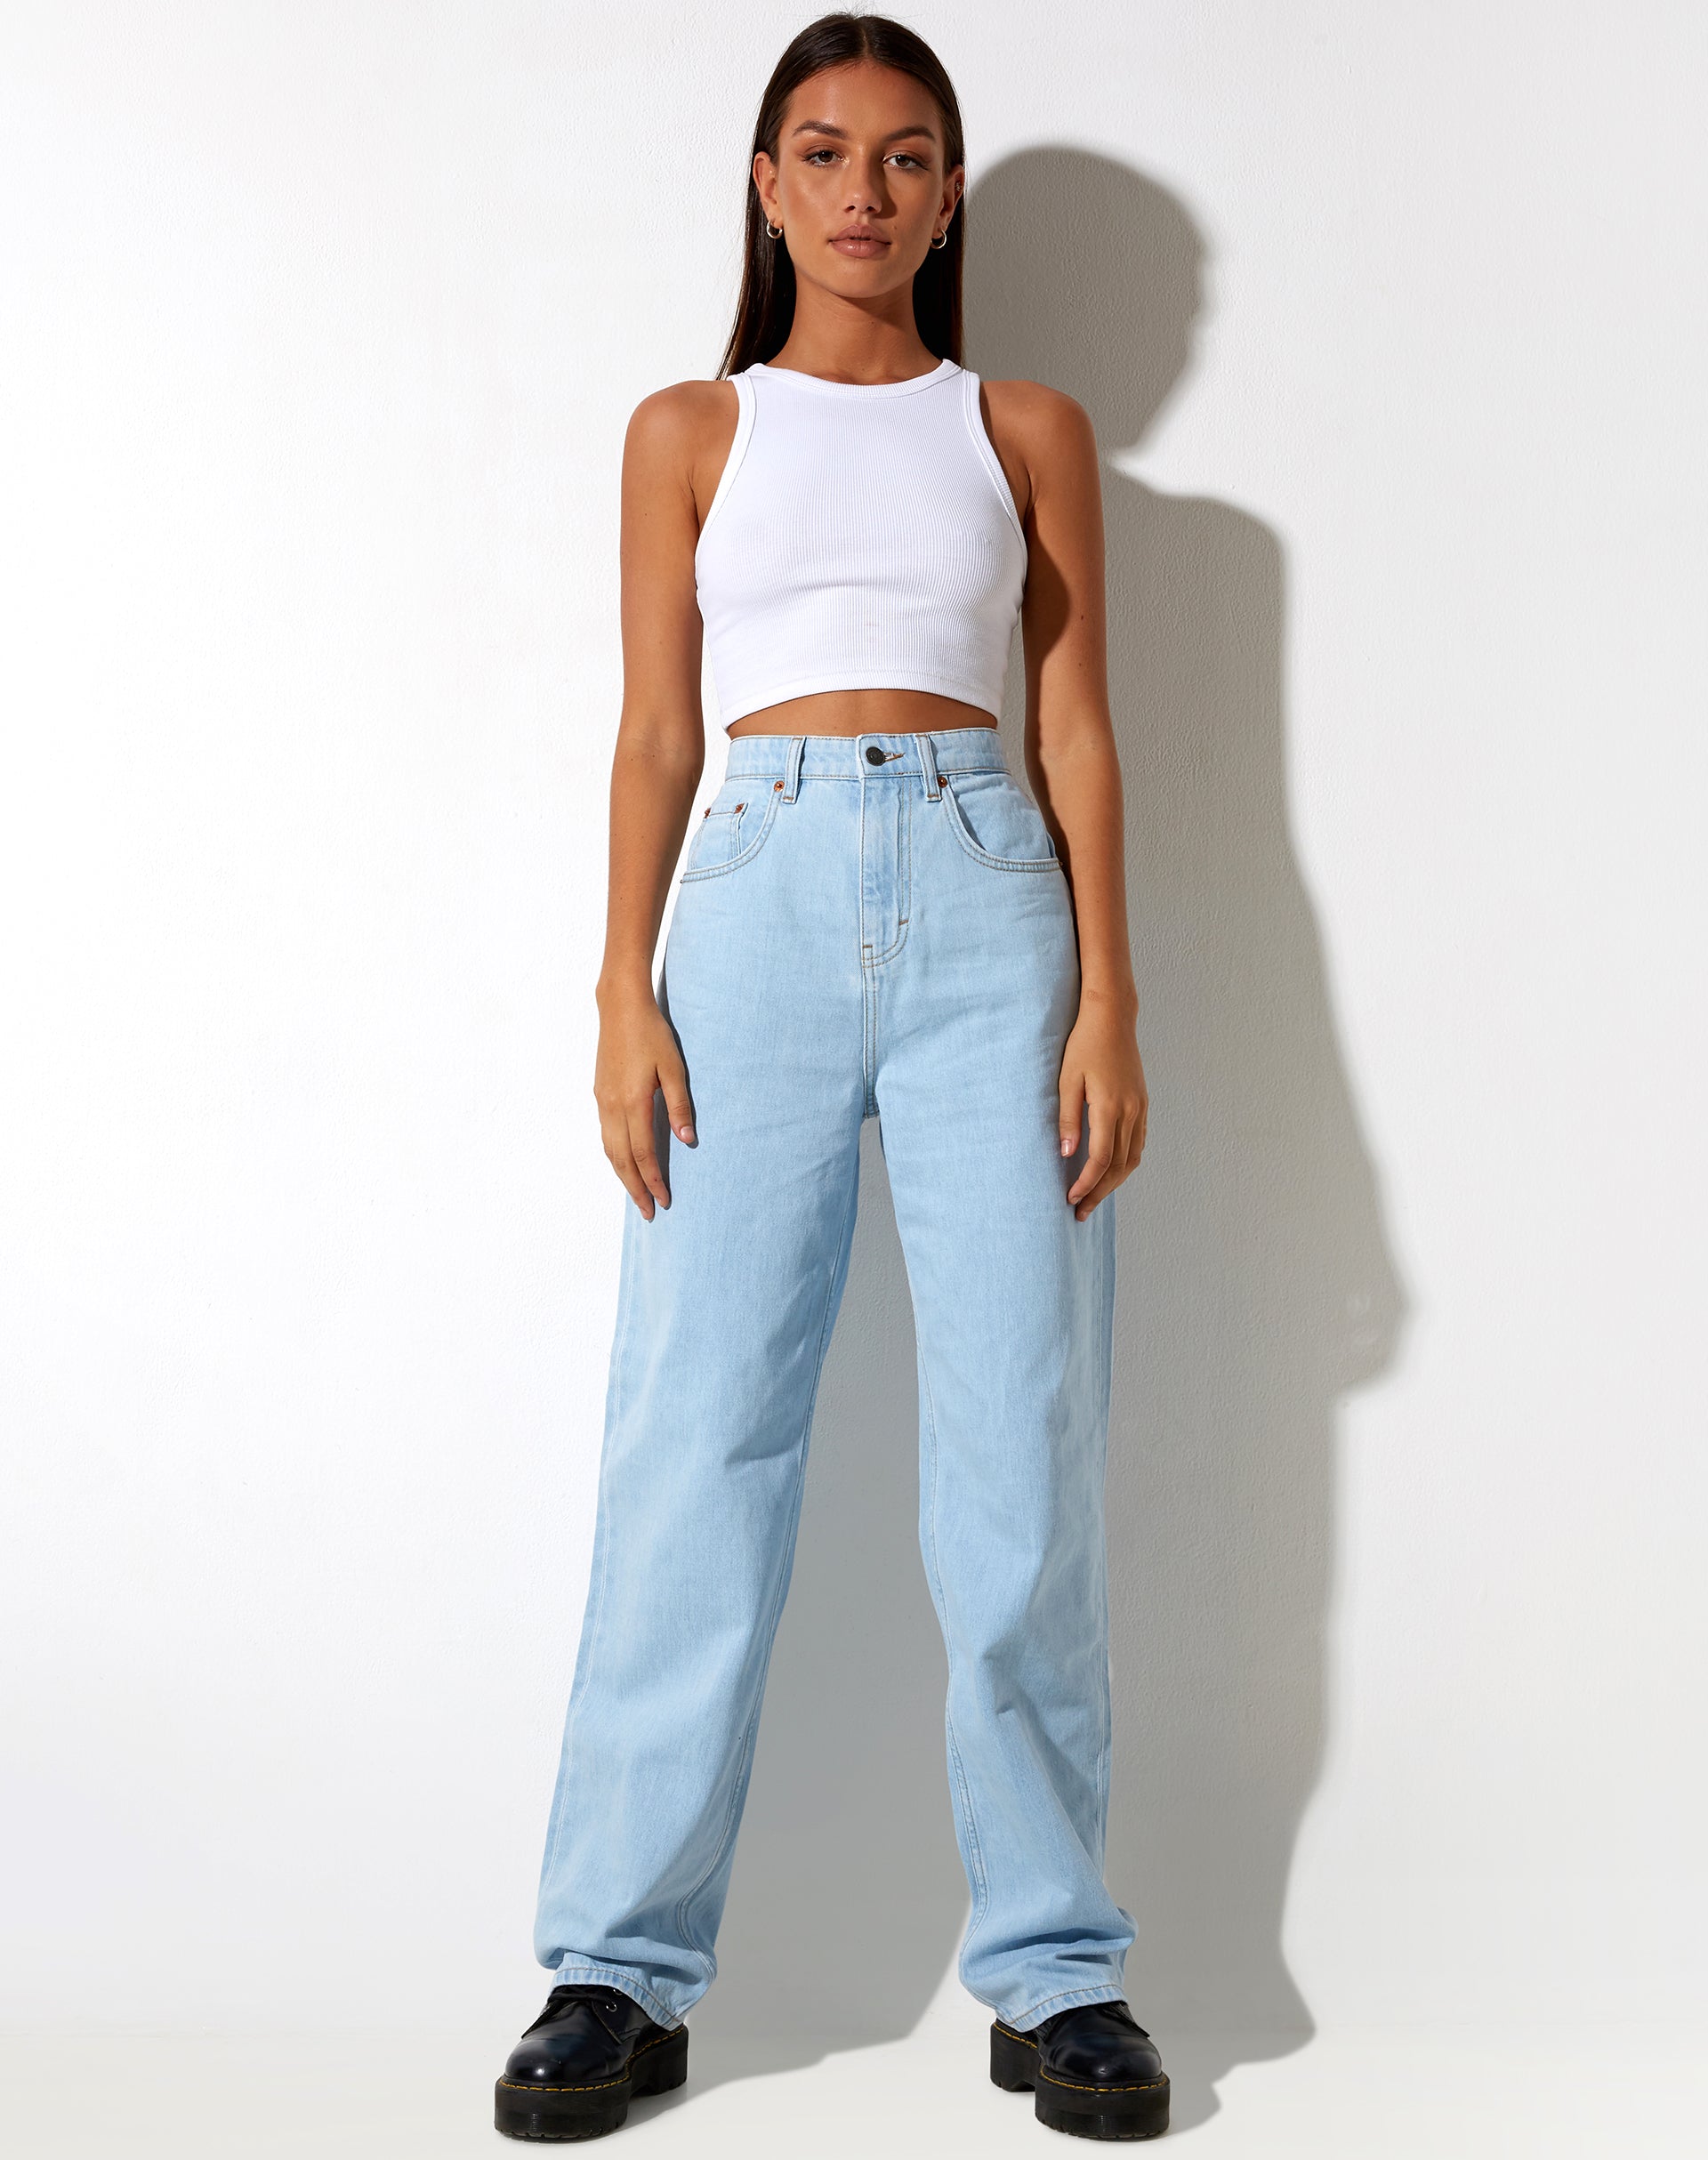 Image of Parallel Jeans in Super Light Wash